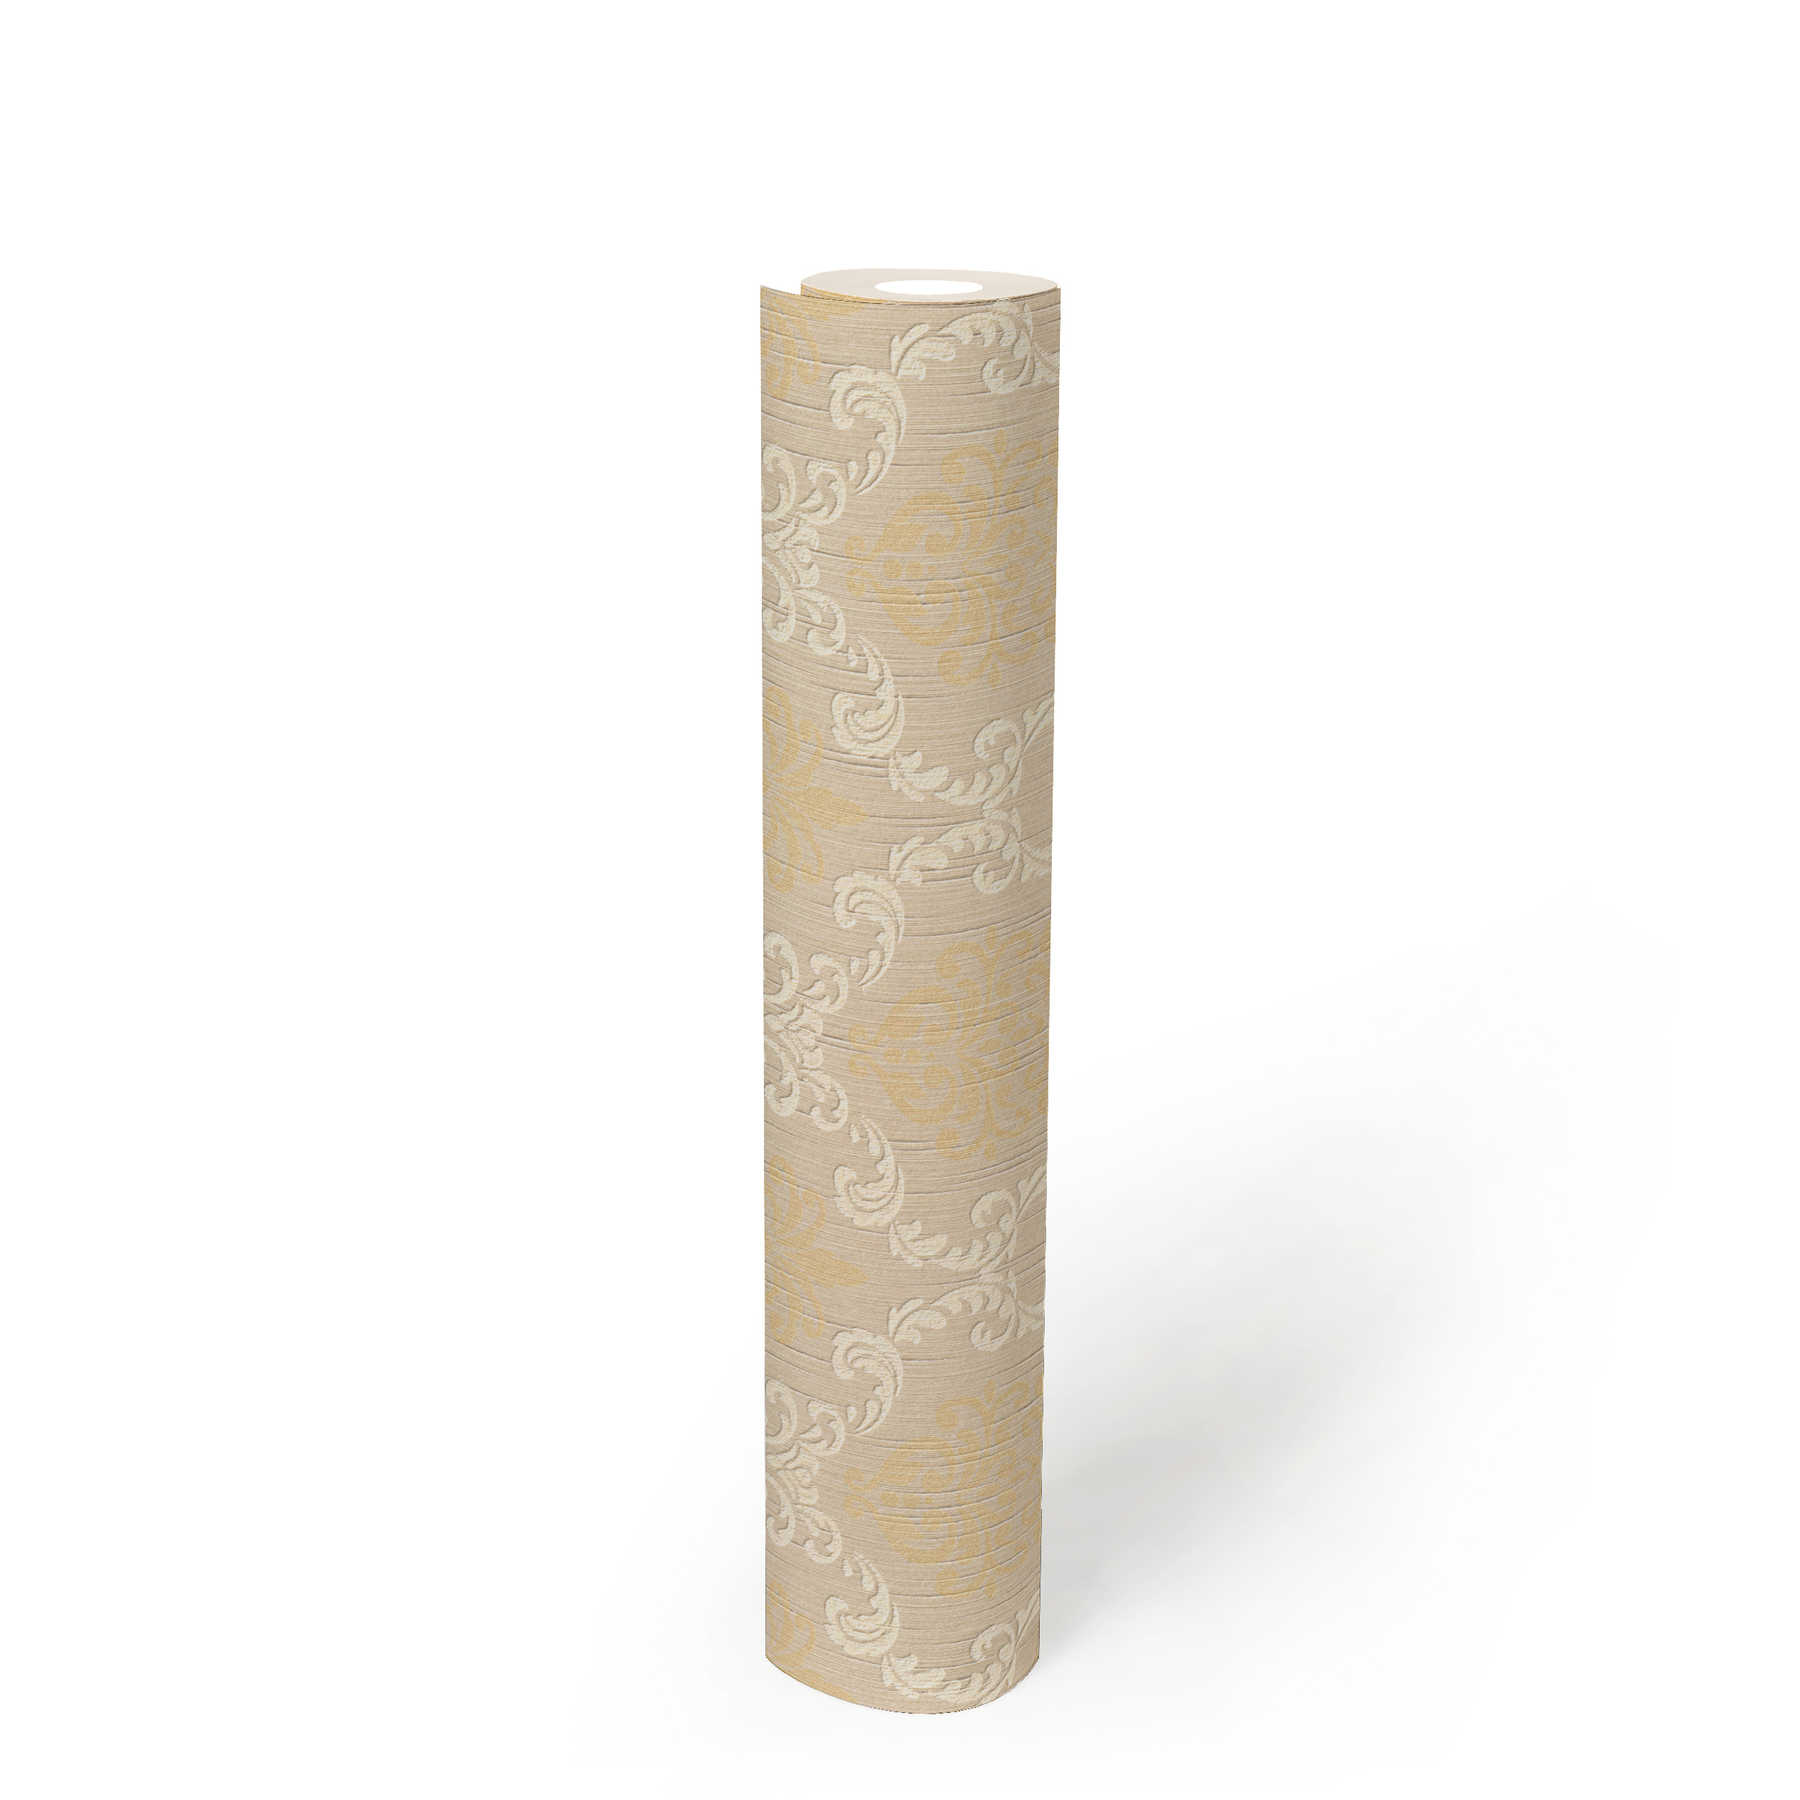             Wallpaper with ornament design in colonial style - beige
        